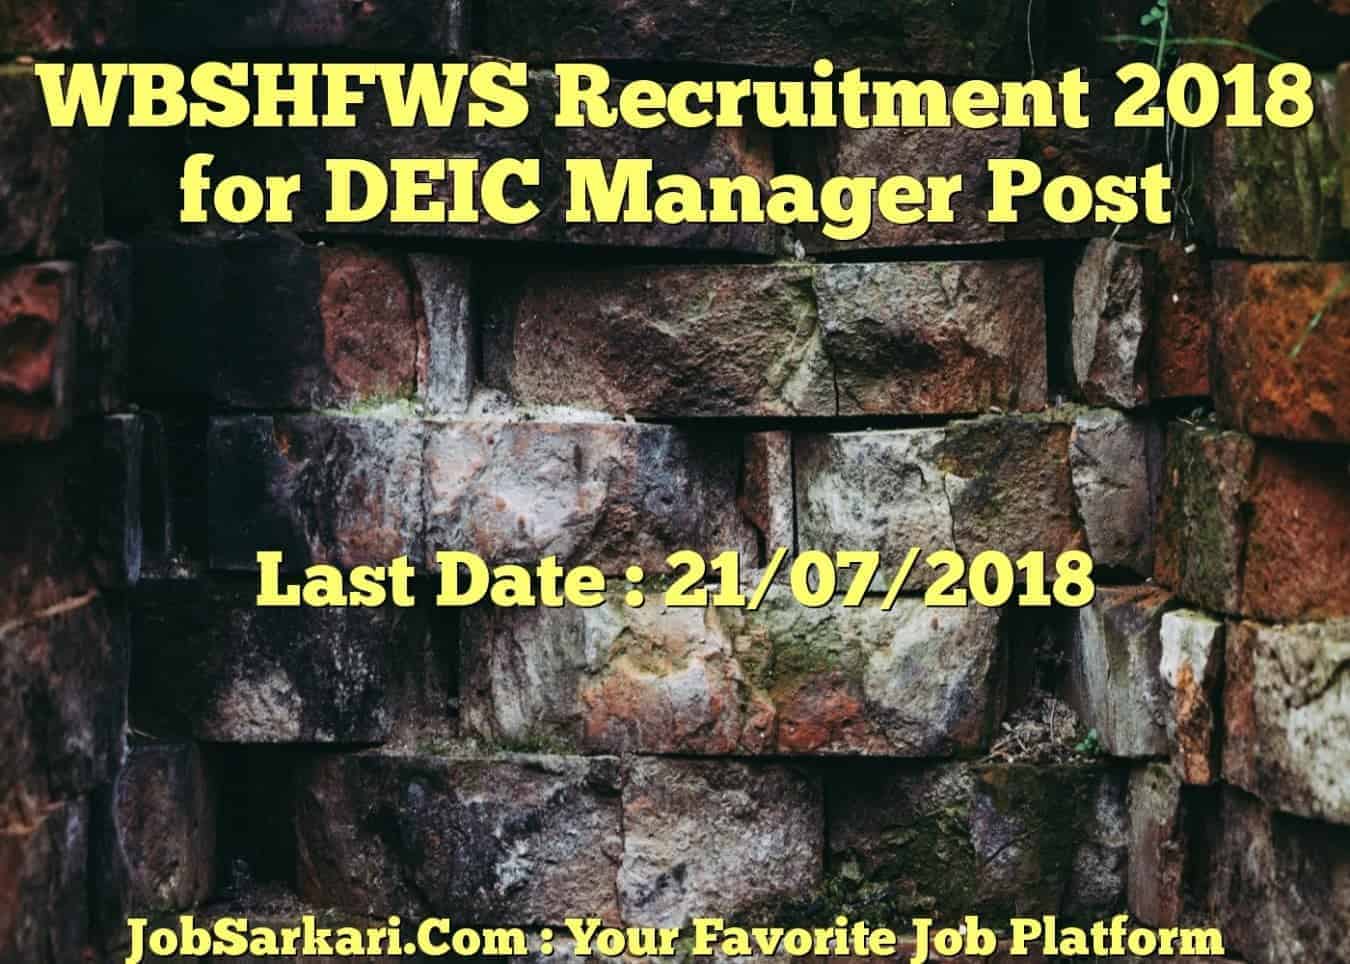 WBSHFWS Recruitment 2018 for DEIC Manager Post